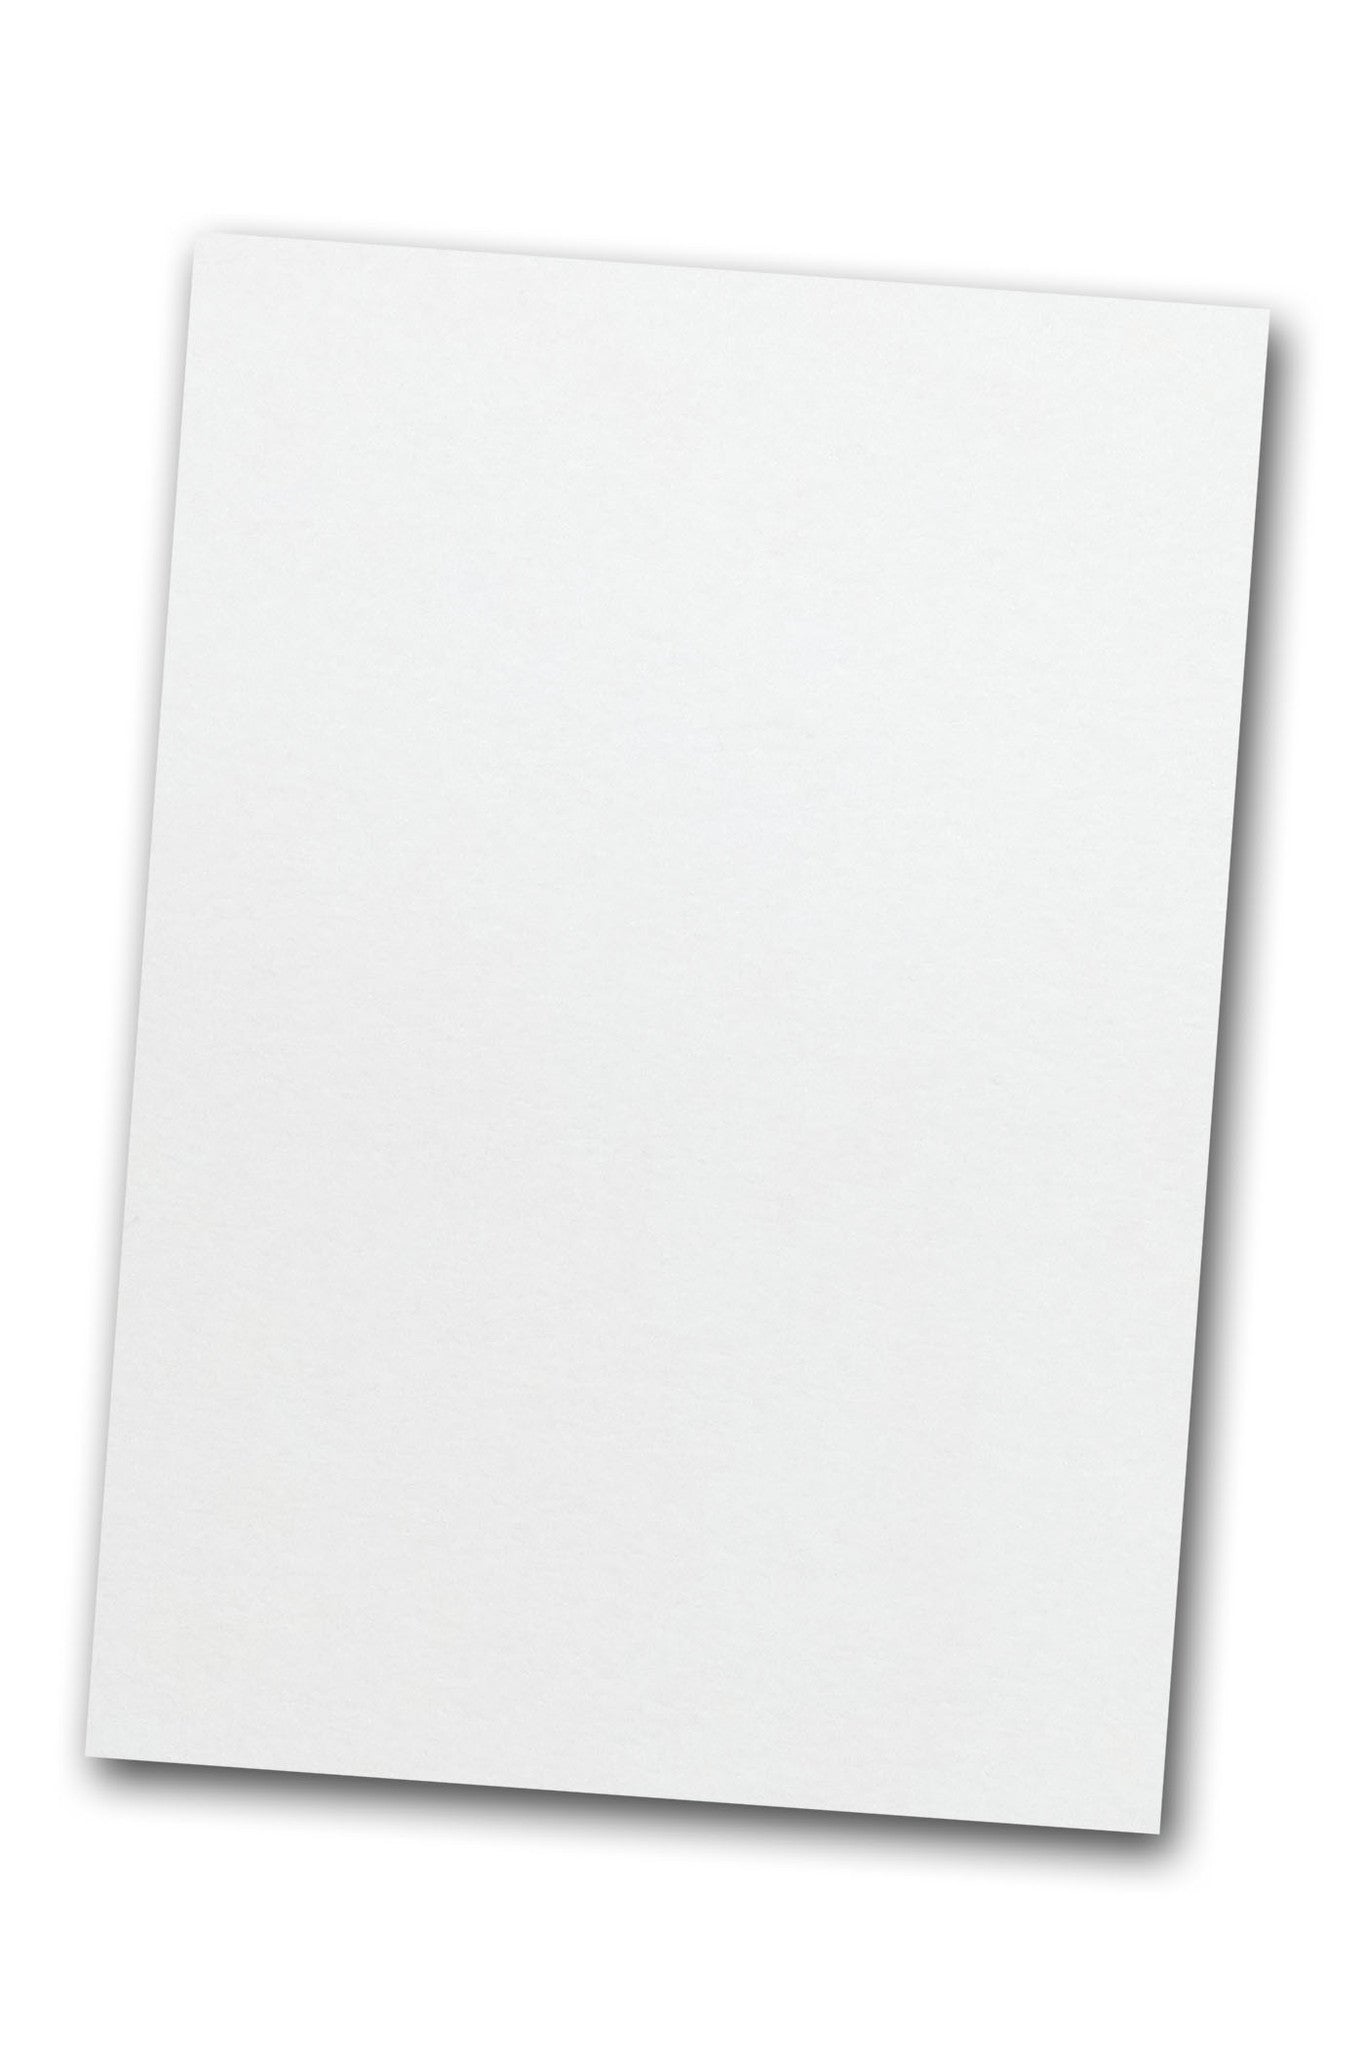 Neenah Cardstock Classic Crest Ultra Thick 110 LB SMOOTH SOLAR WHITE P